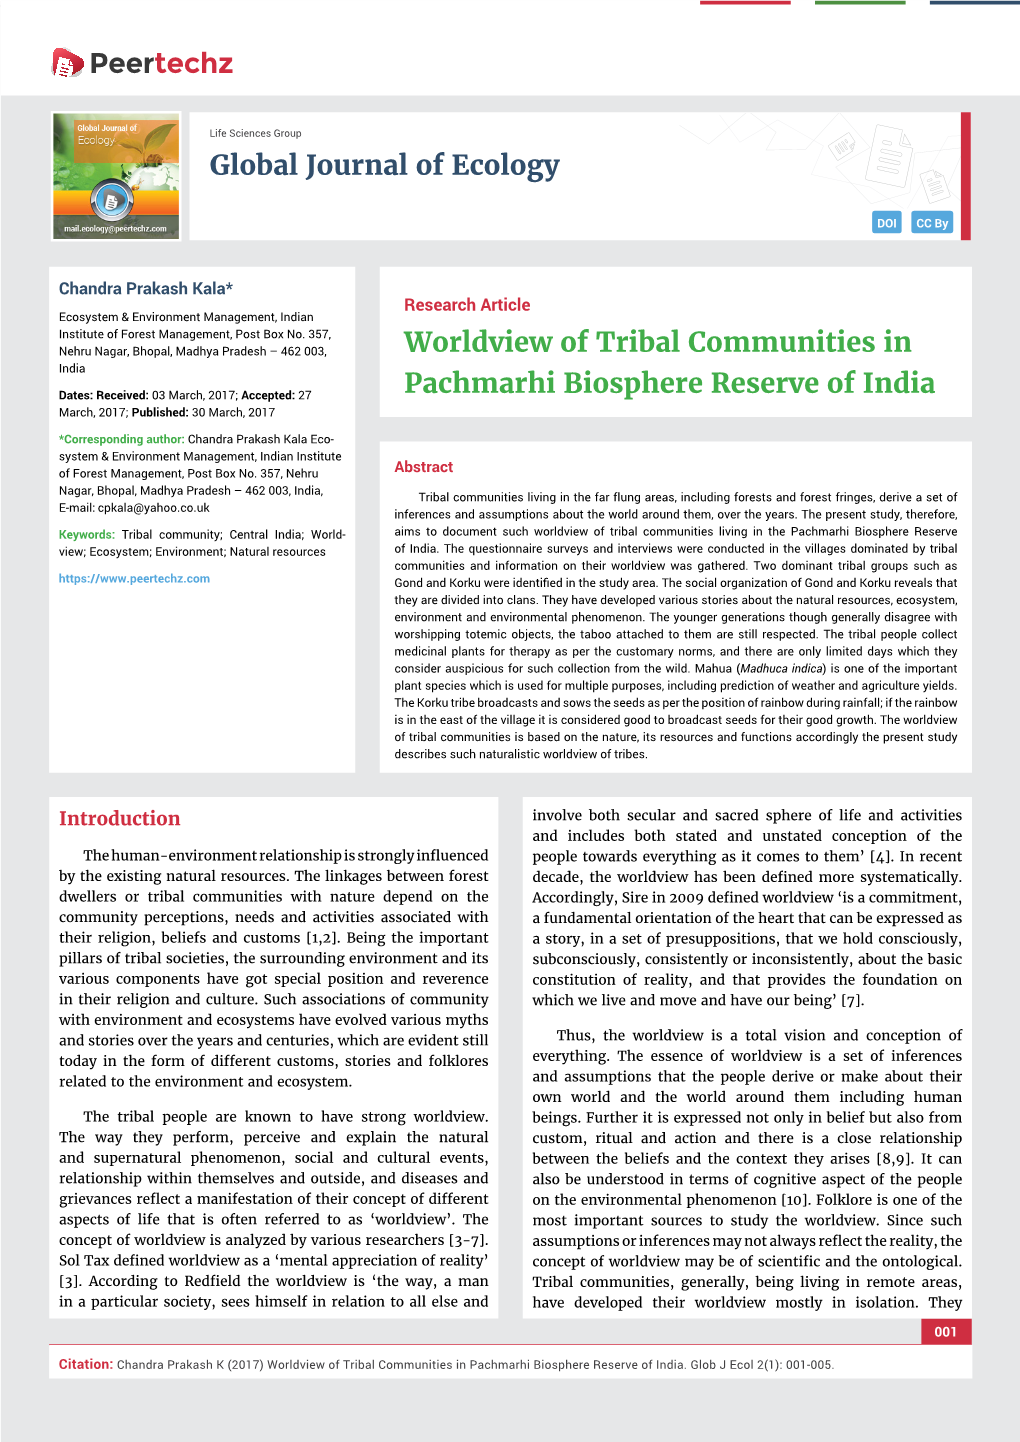 Worldview of Tribal Communities in Pachmarhi Biosphere Reserve of India